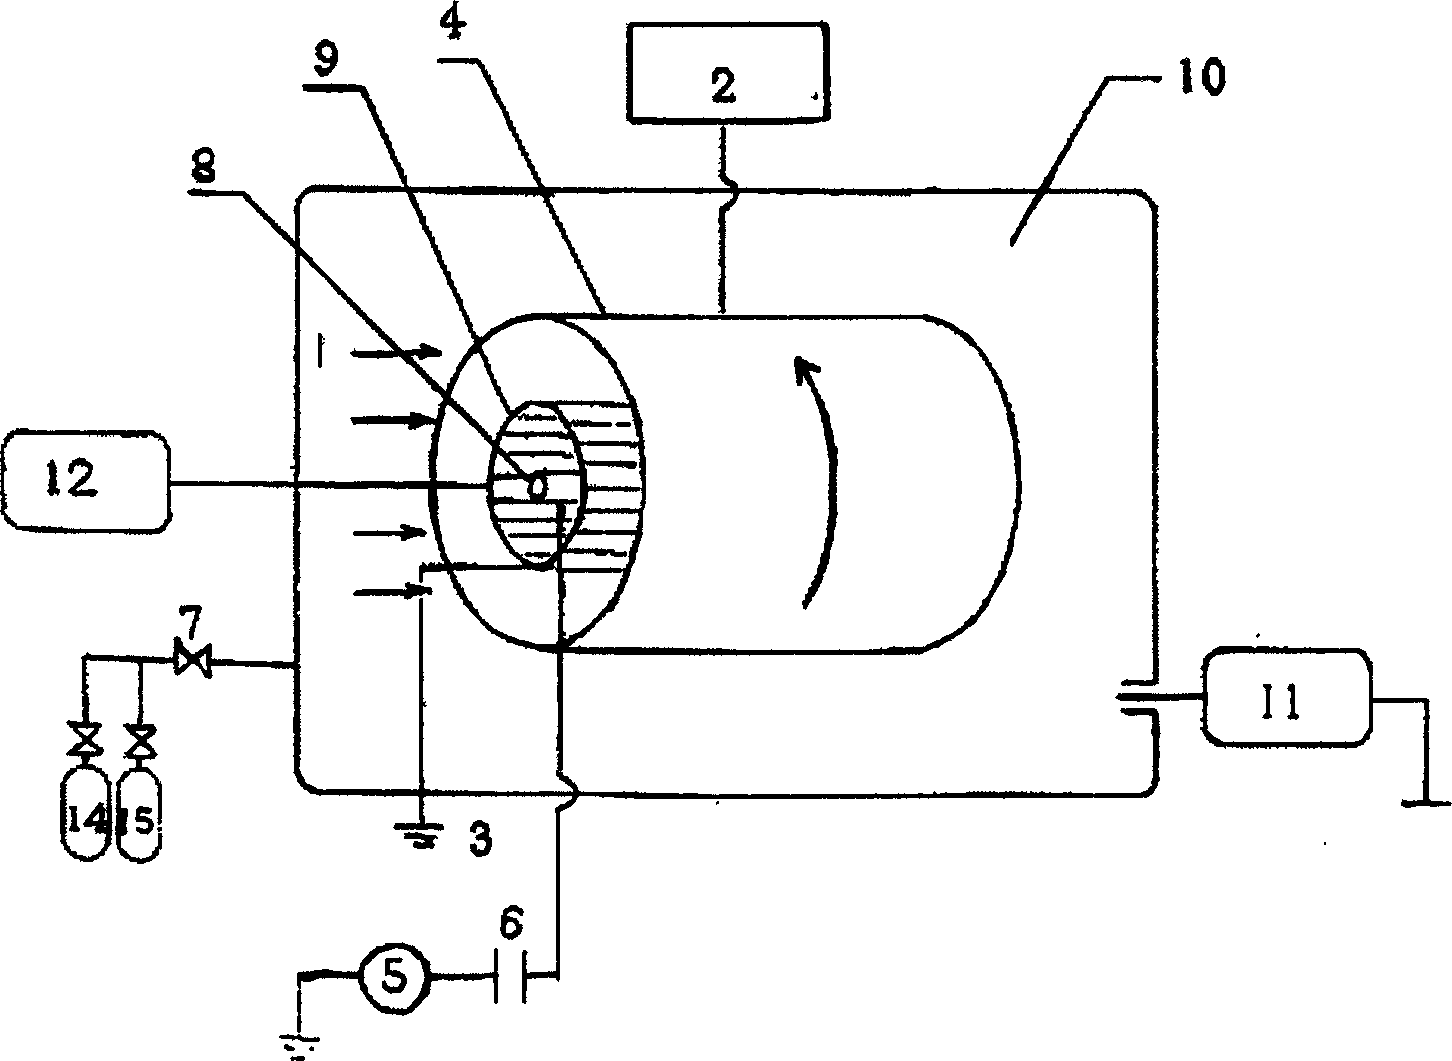 Apparatus for inner surface modification by plasma source ion implantation